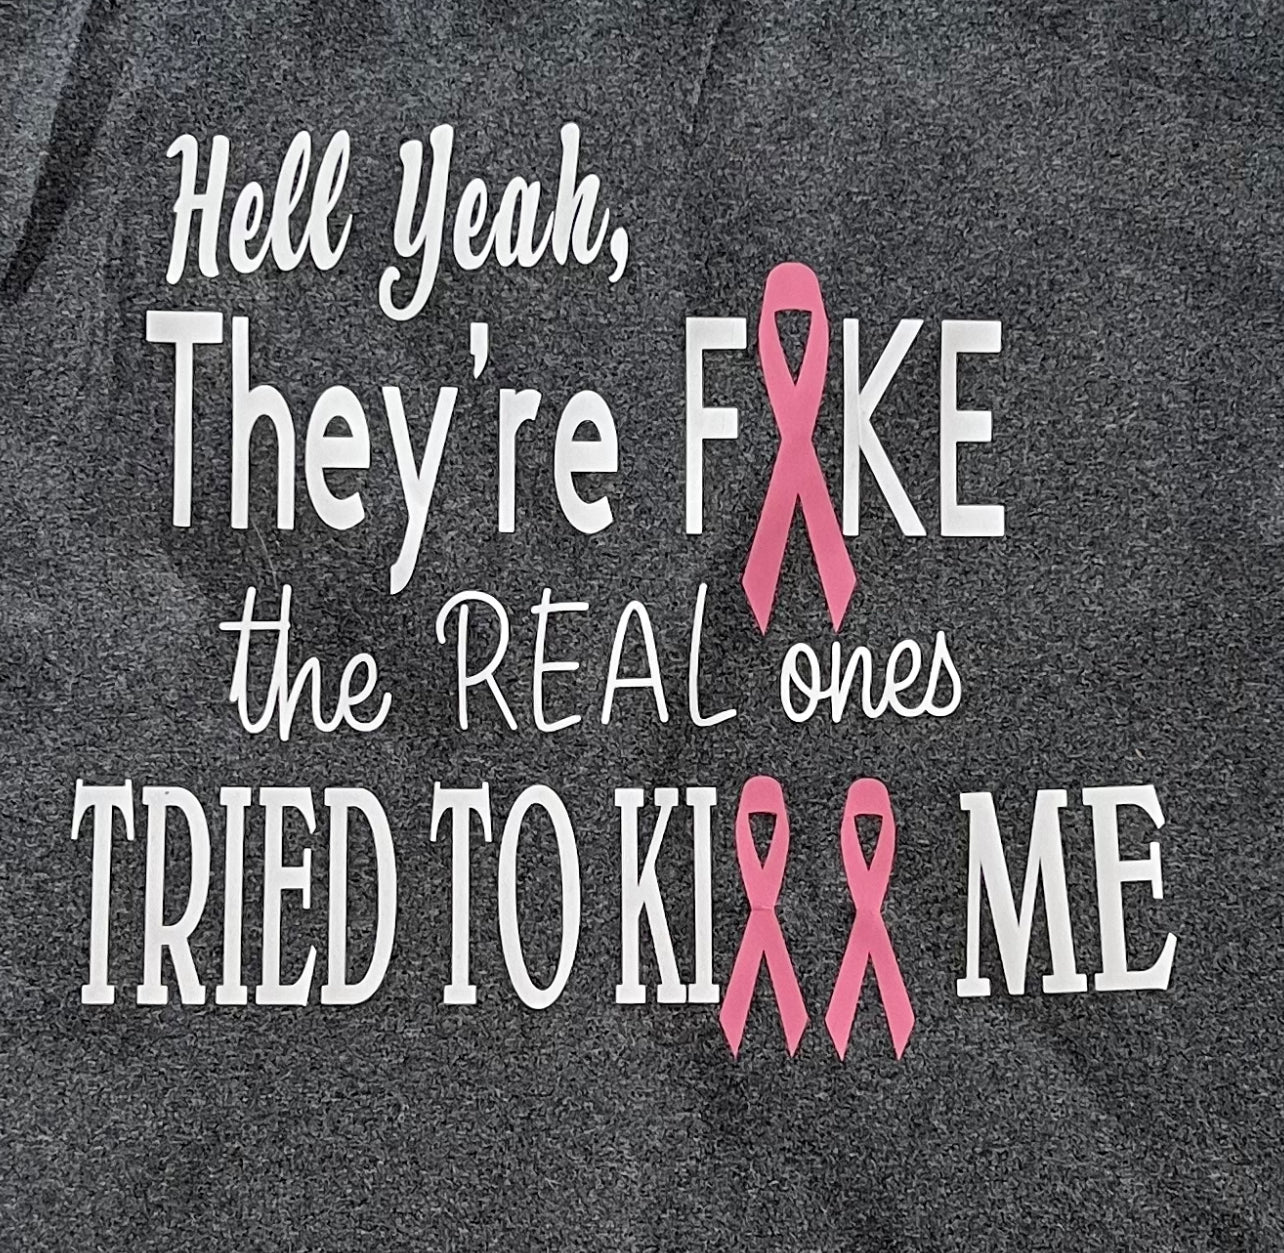 Hell yeah, they’re fake! women’s Tank top